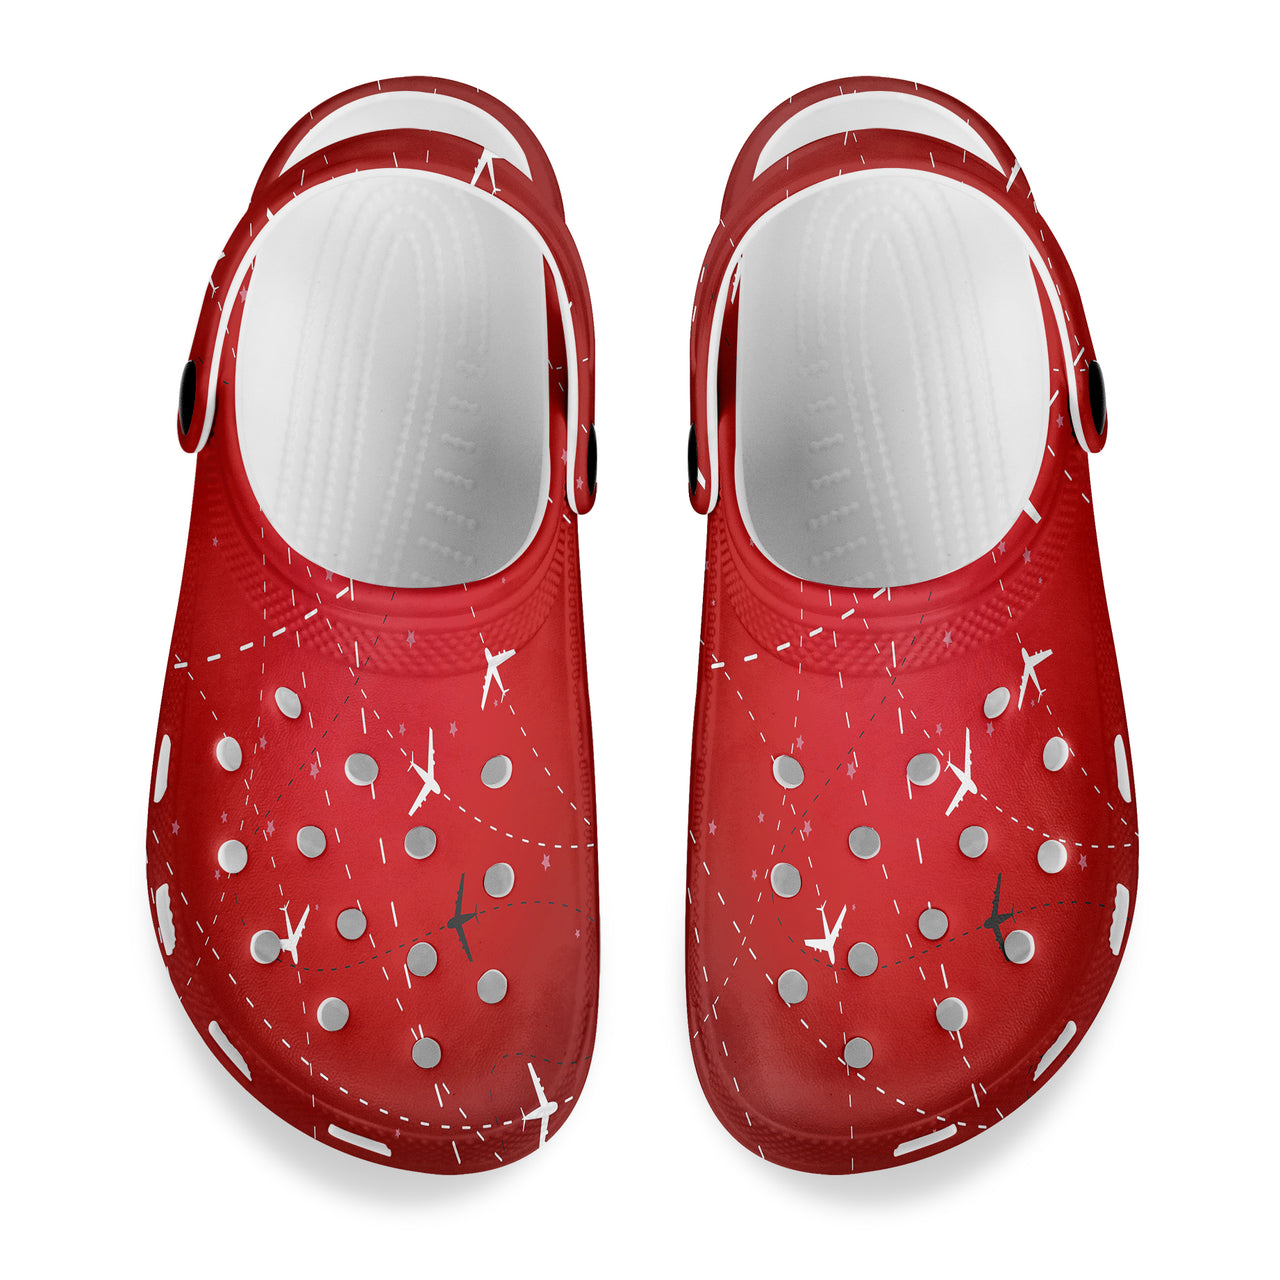 Travelling with Aircraft (Red) Designed Hole Shoes & Slippers (MEN)